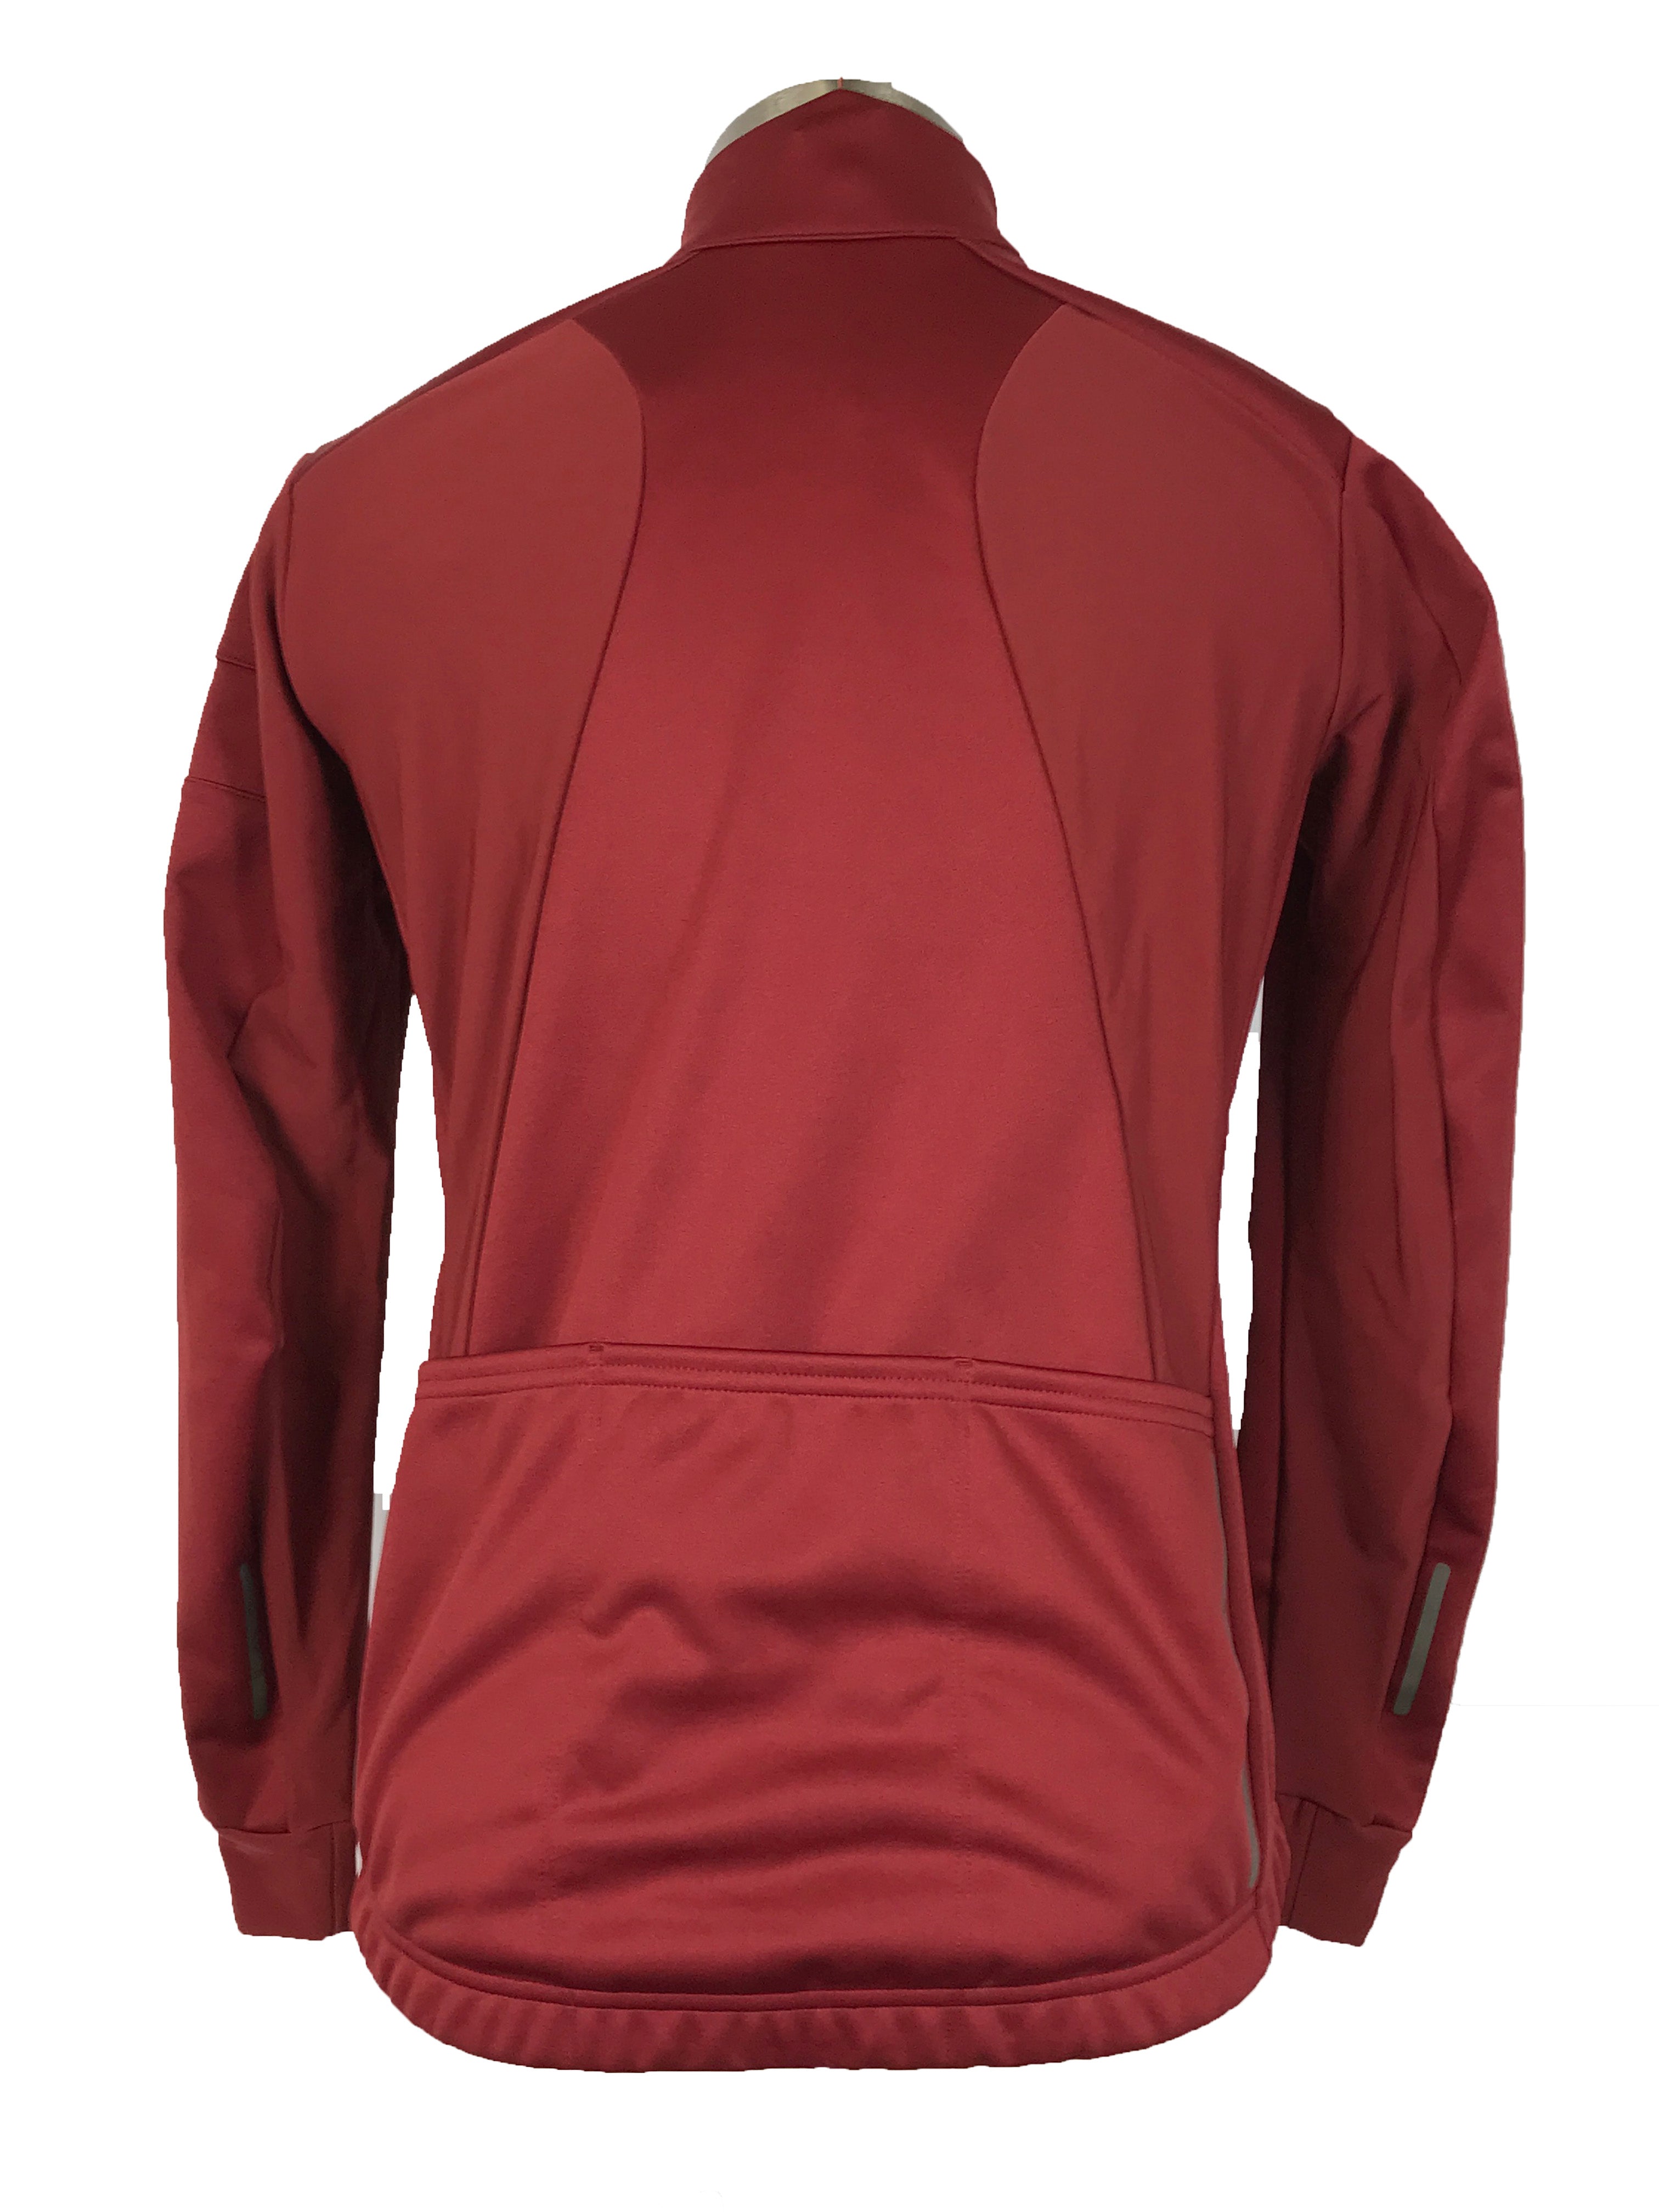 Specialized RBX Comp Maroon Softshell Jacket Women's Size M NWT